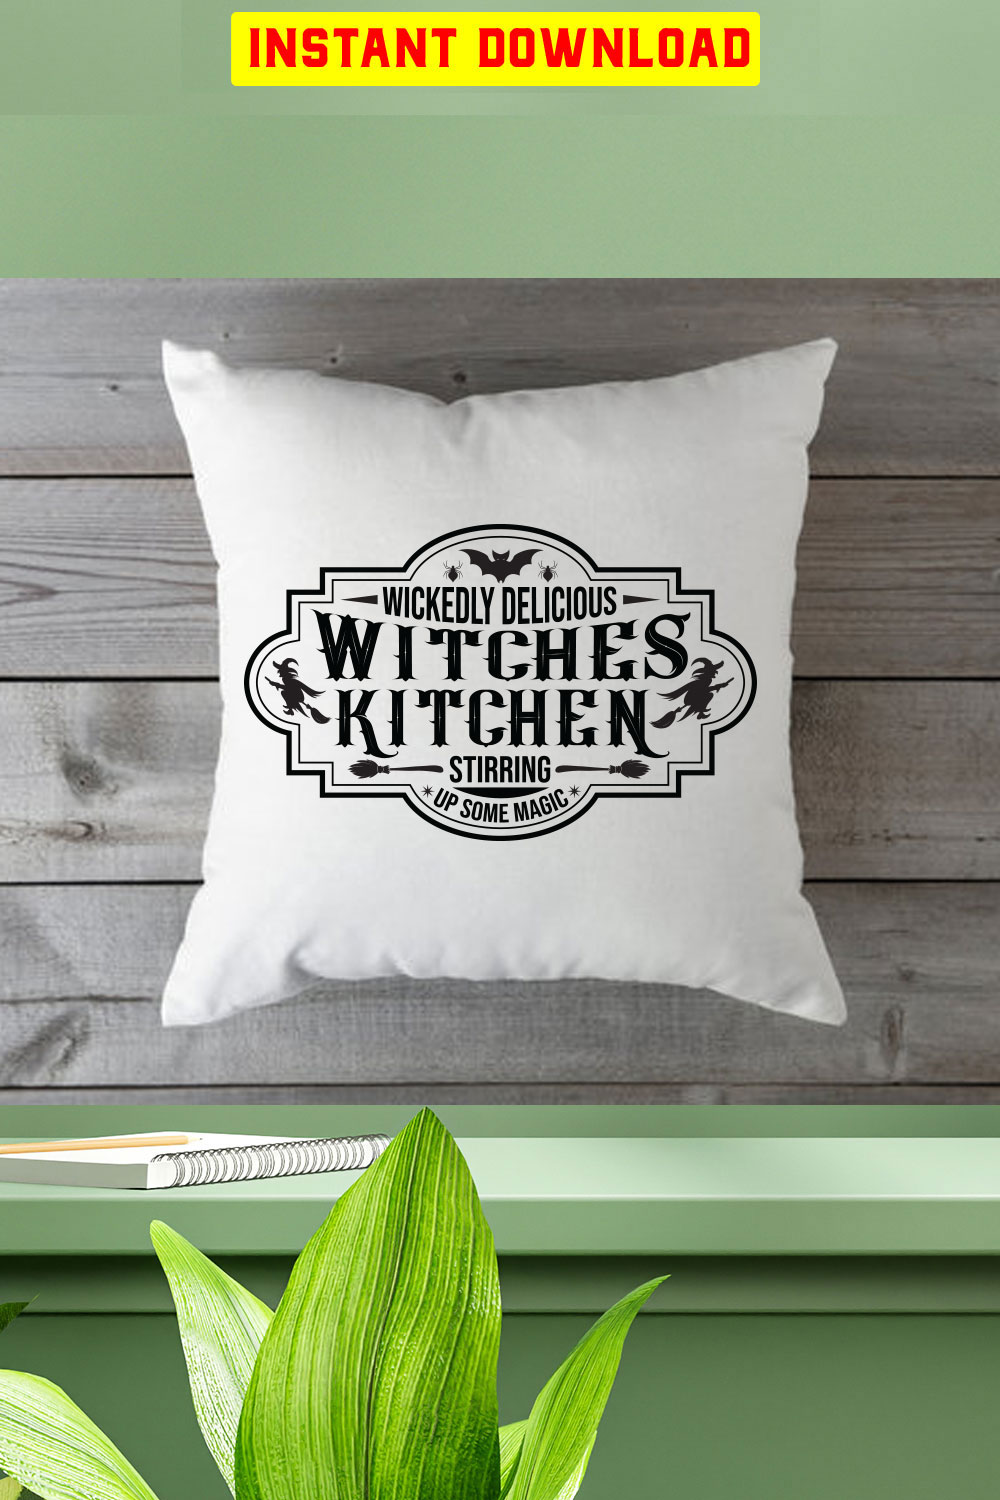 Wickedly Delicious Witches Kitchen Stirring Up Some Magic pinterest preview image.